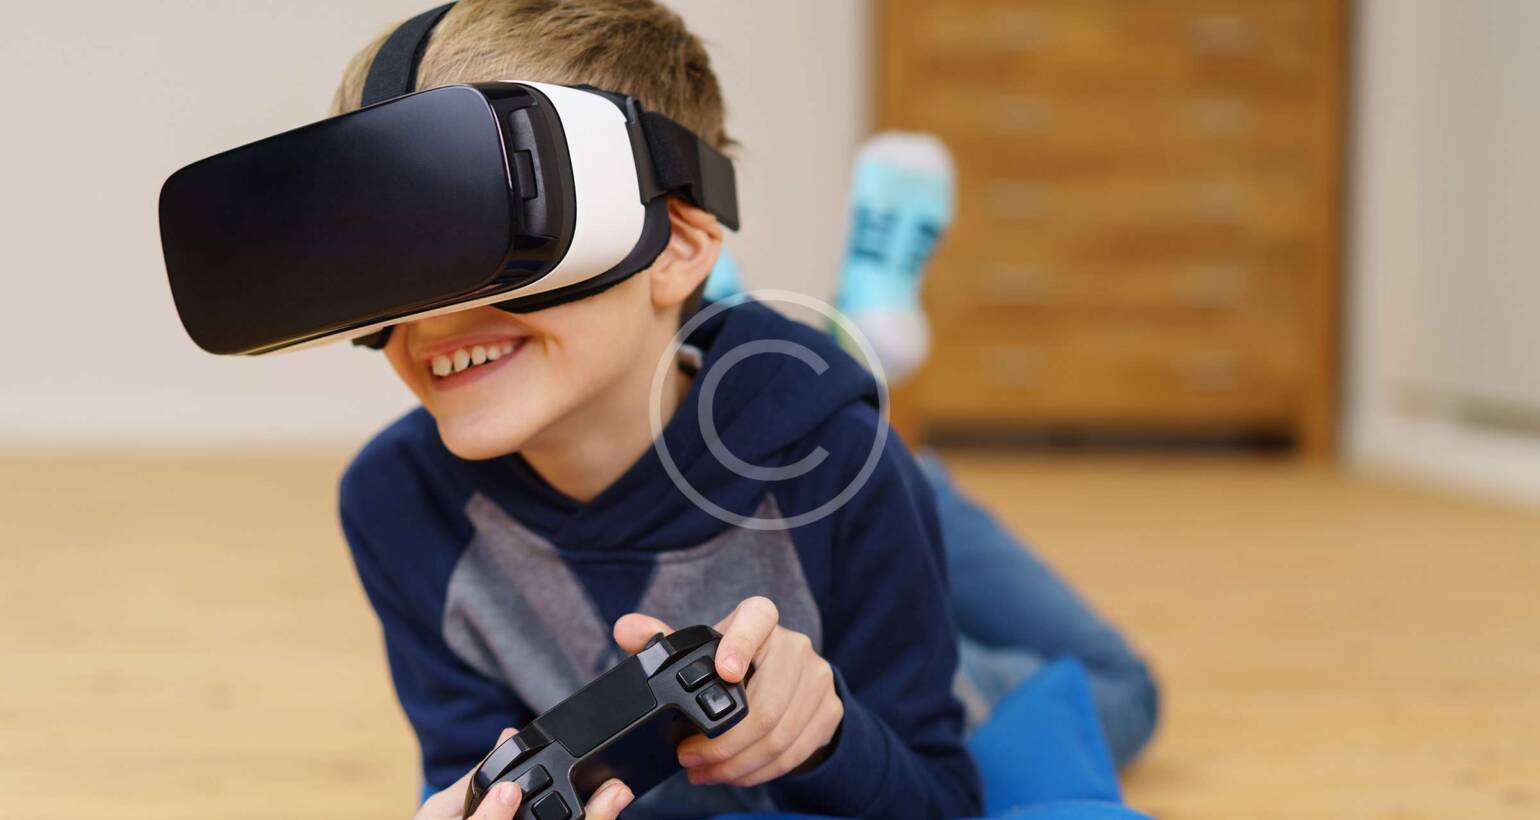 Top 10 Best Virtual Reality Headsets